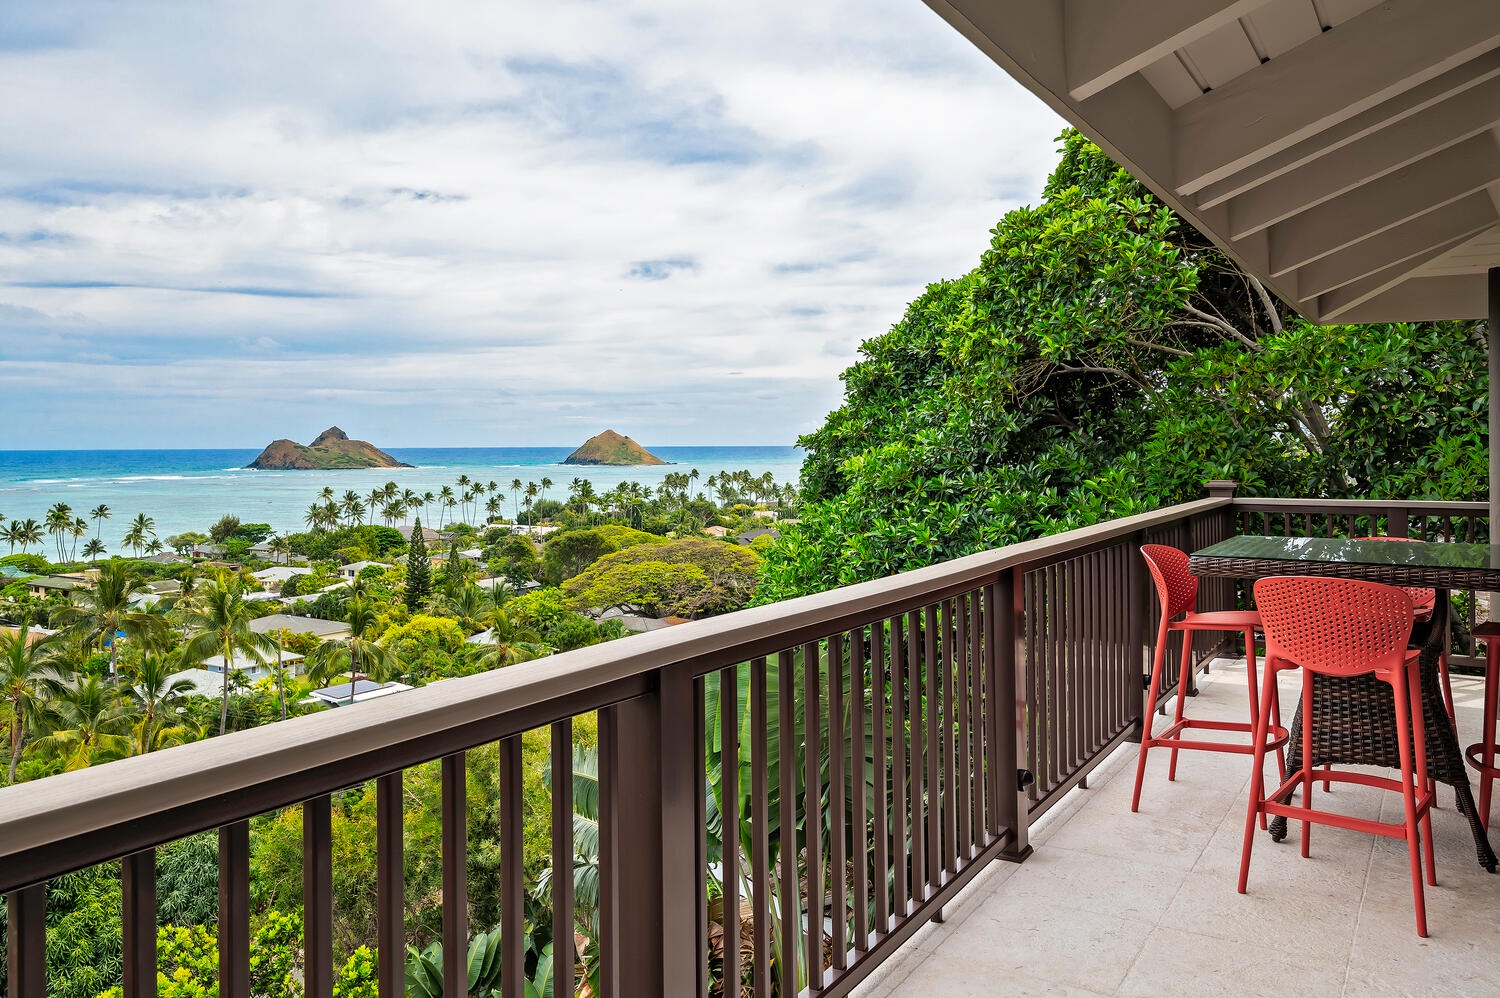 Kailua Vacation Rentals, Hale Lani - See the heavenly views of the ocean and Mokulua Islands